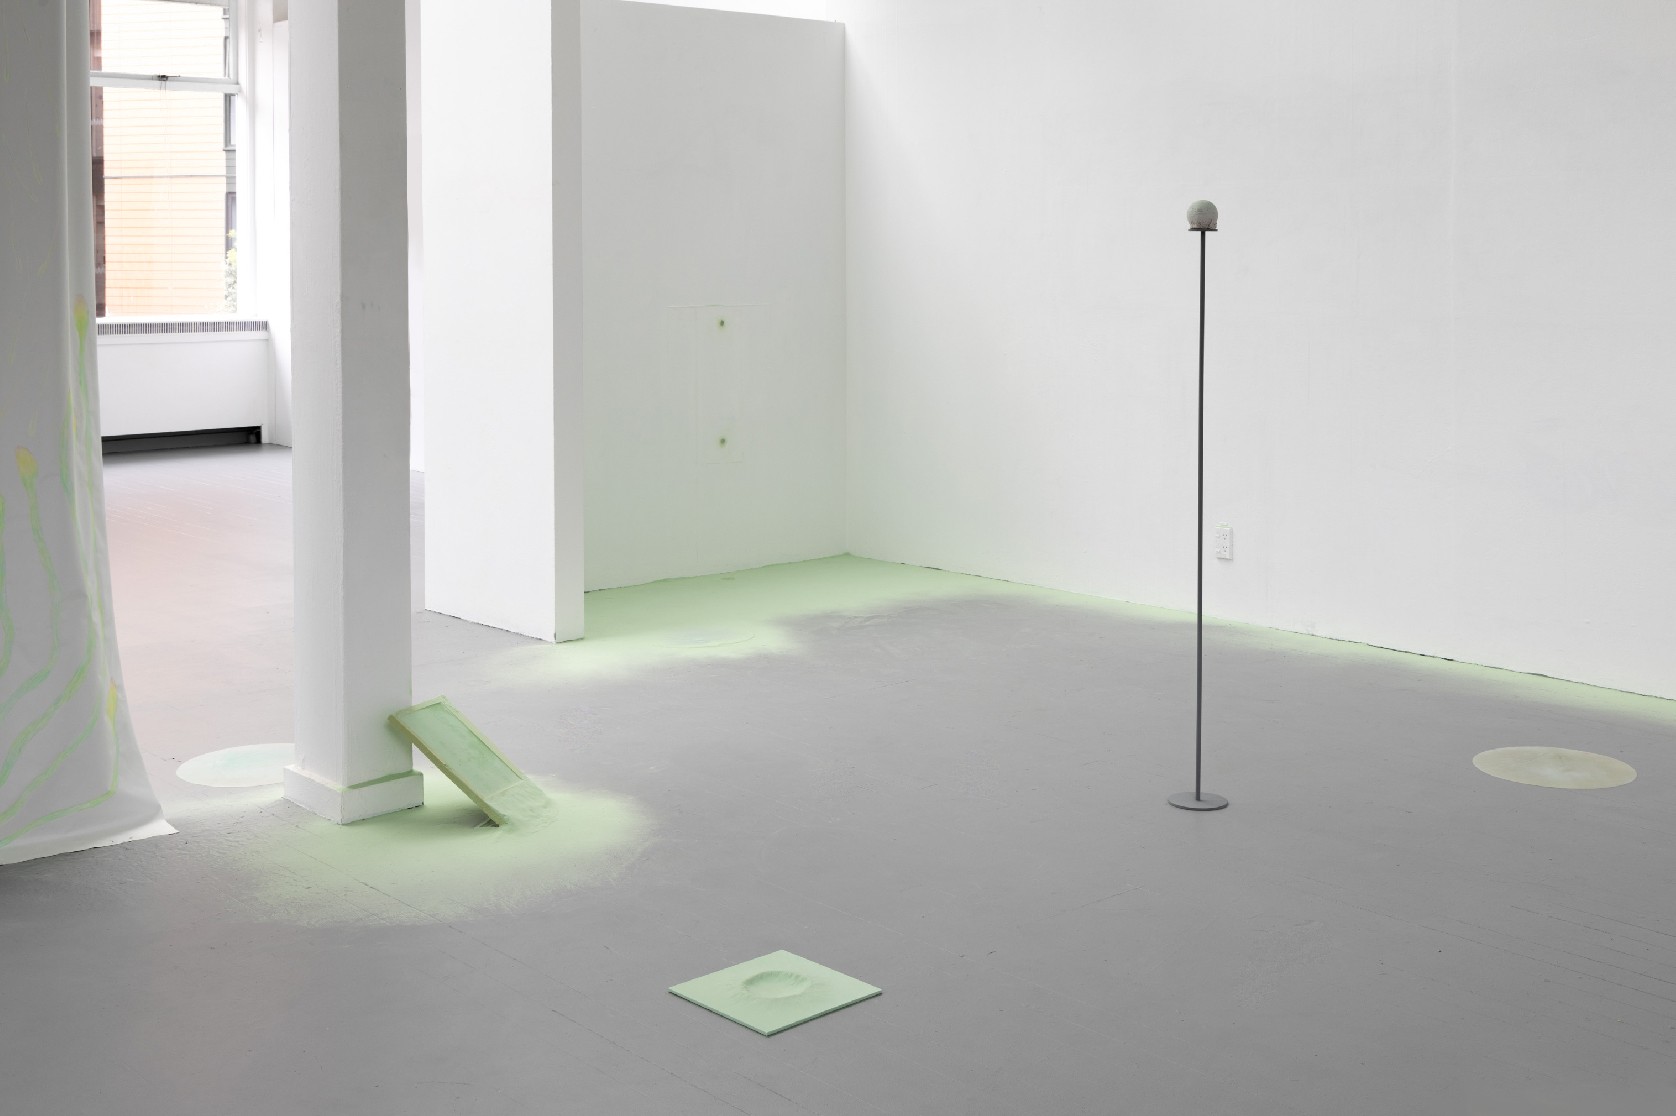 A plain room with white walls and a grey floor with small objects scattered around spraypainted pastel green, the green spilling onto the floor surrounding.